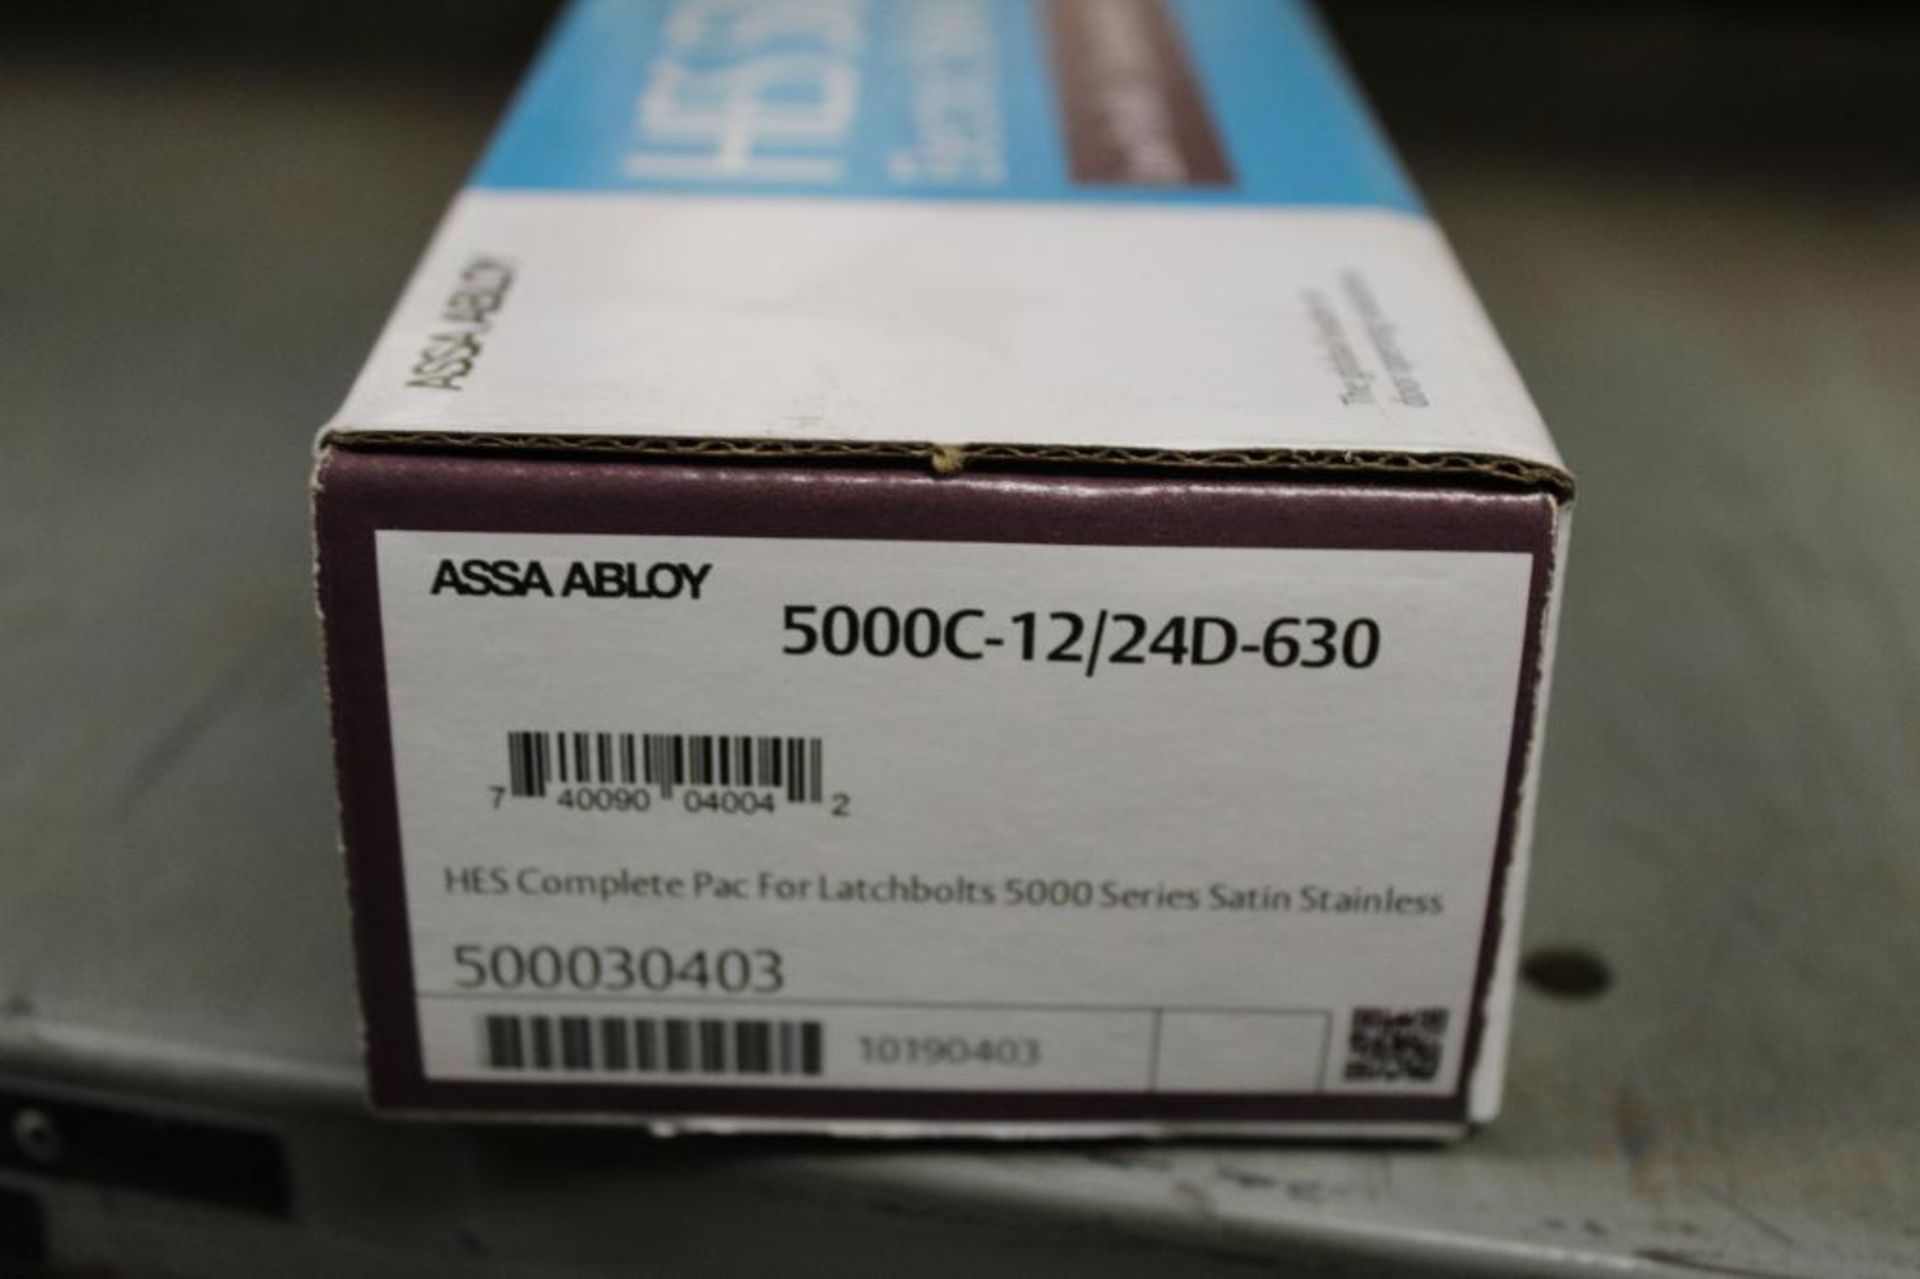 Lot of Assa Abloy HES Electric Strike Body 1006 Series &HES Complete Pac for Latchbolts 5000 Series - Bild 3 aus 15